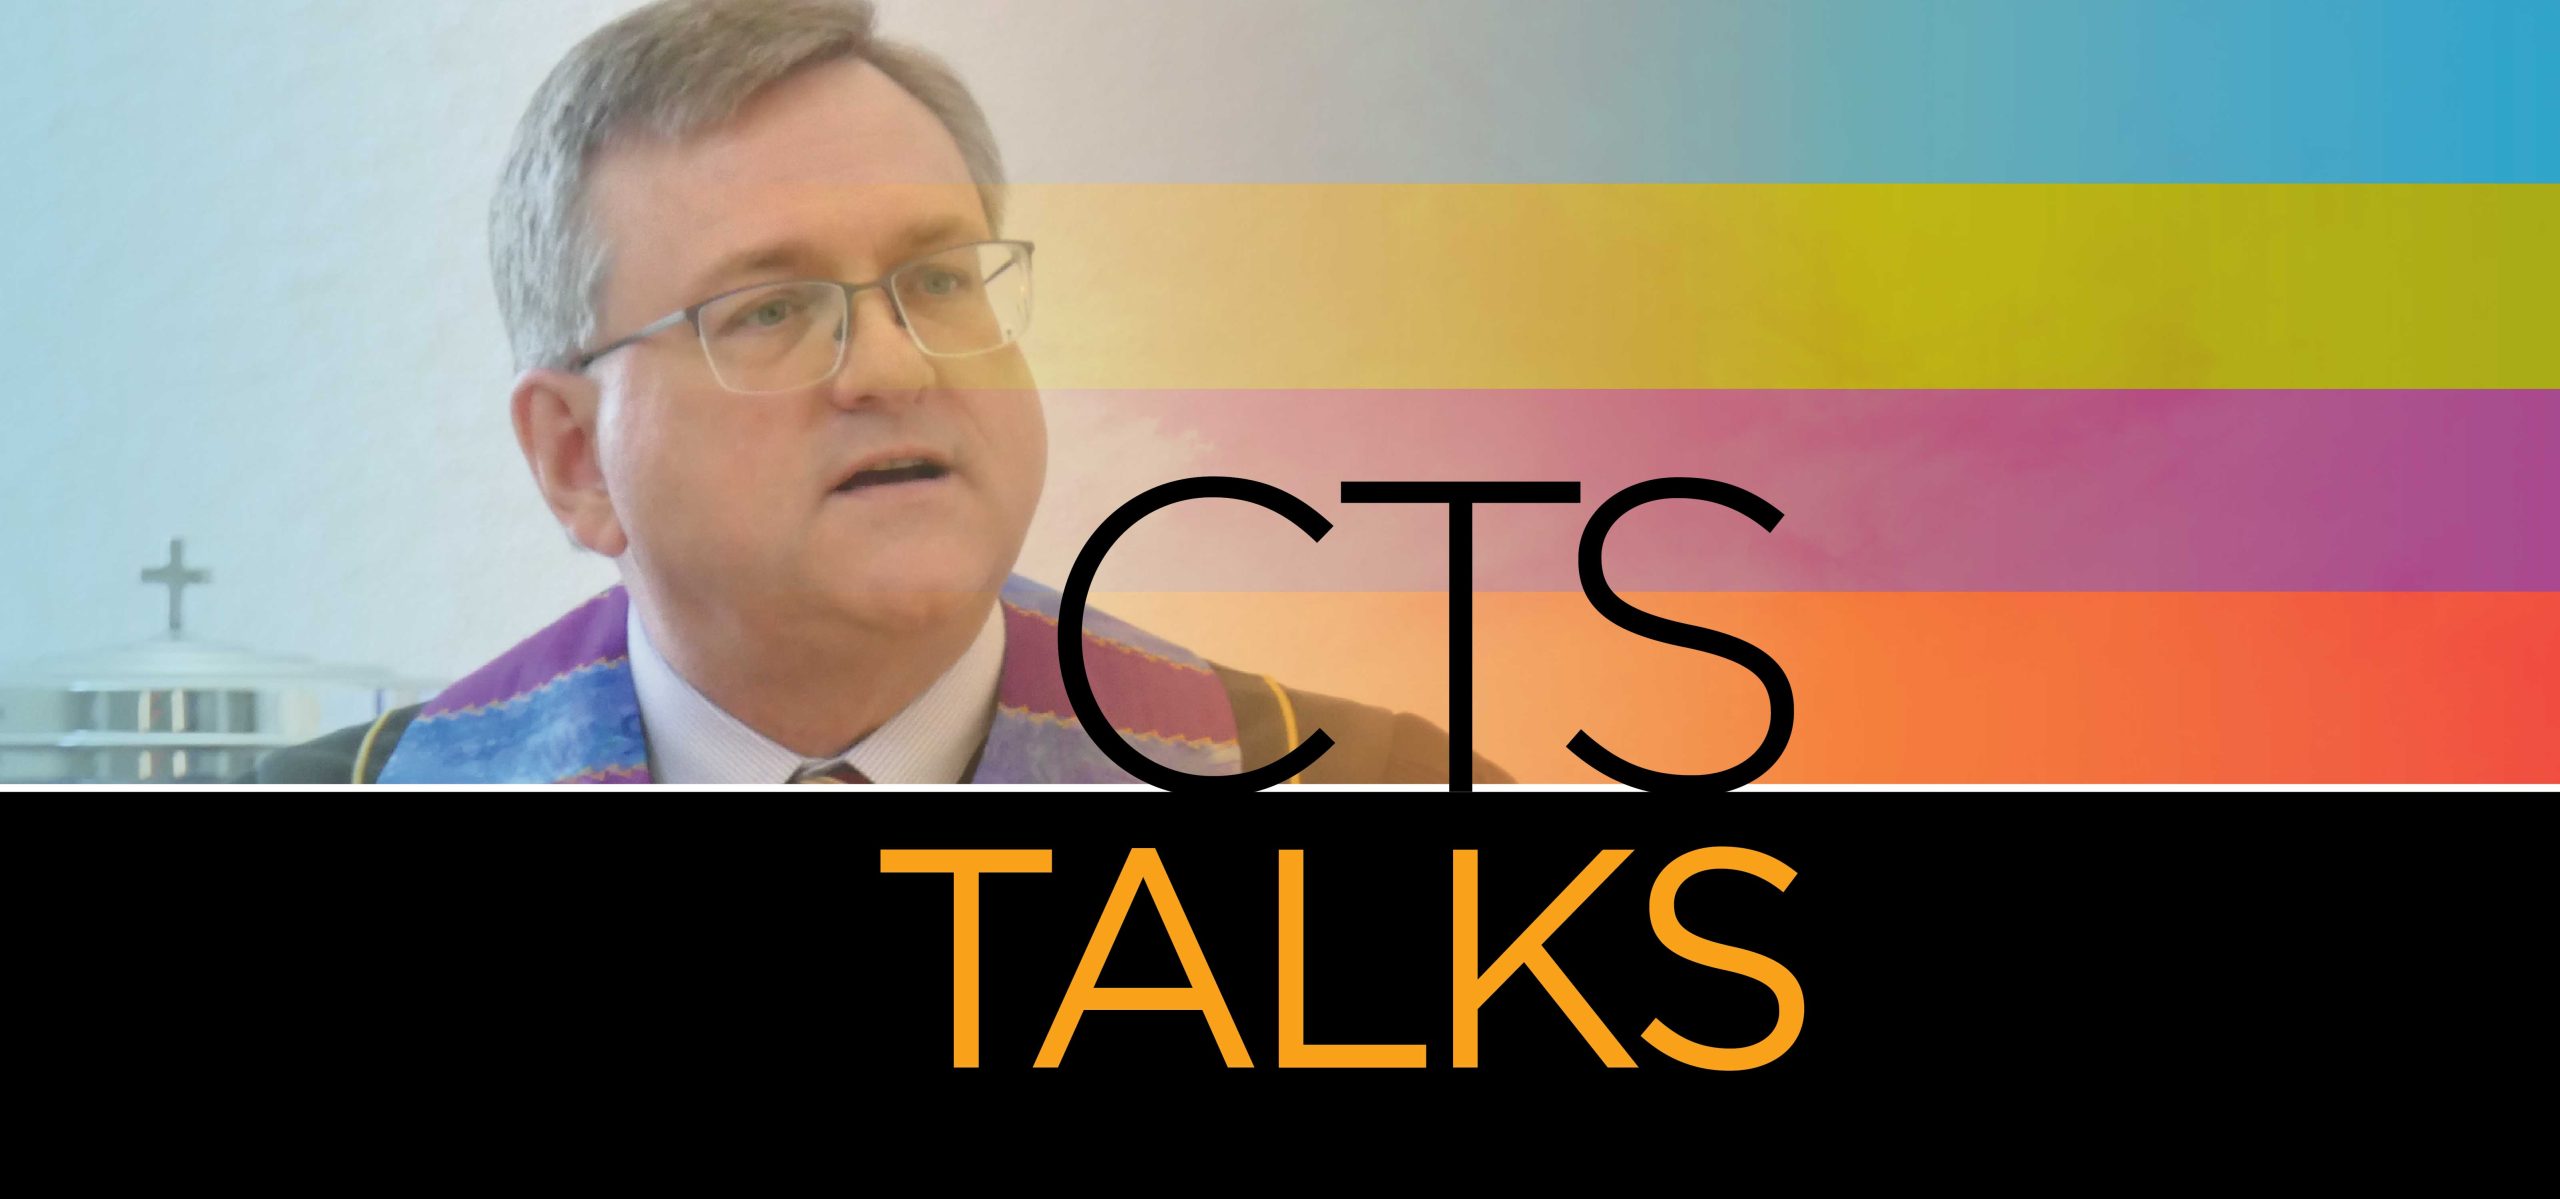 CTS Talks with Dr. Seay